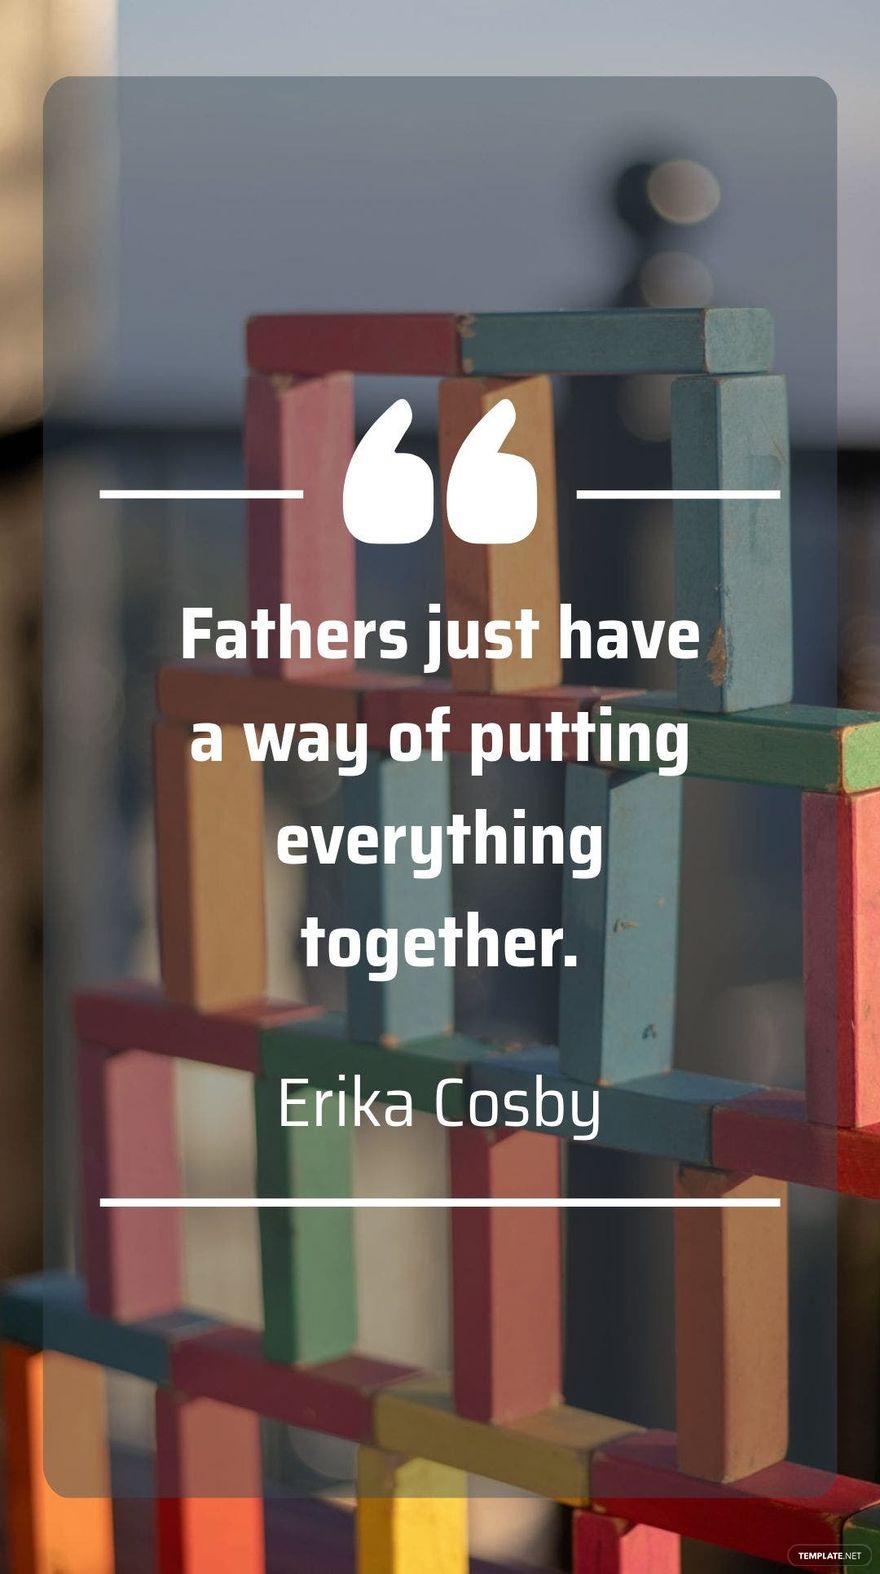 Erika Cosby - “Fathers just have a way of putting everything together.” 